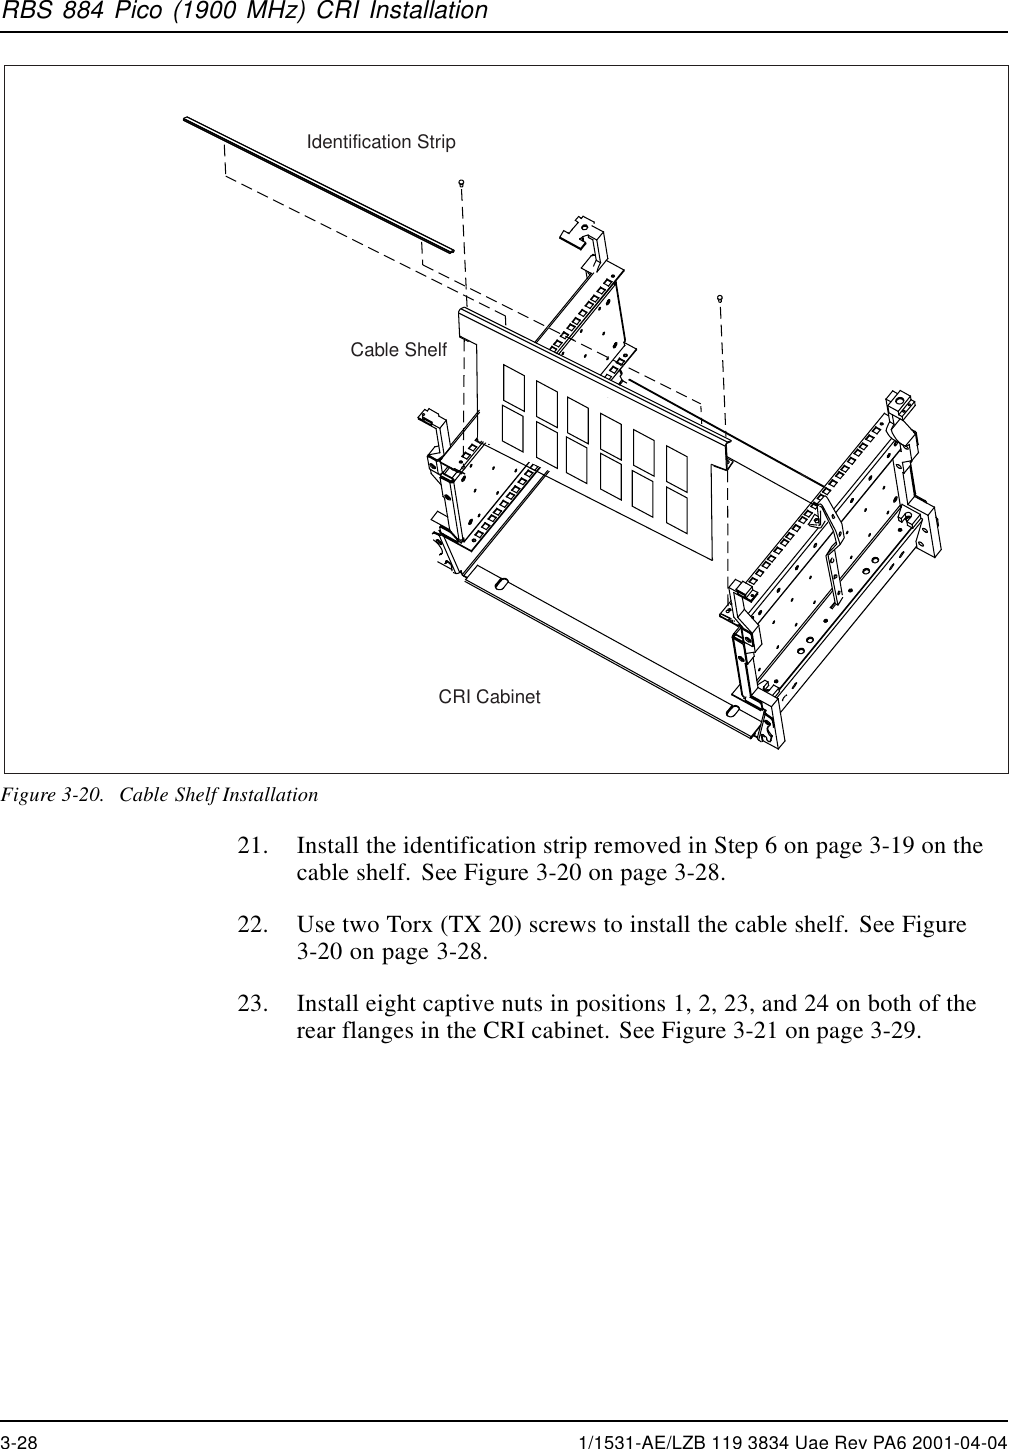 RBS 884 Pico (1900 MHz) CRI InstallationIdentification StripCable ShelfCRI CabinetFigure 3-20. Cable Shelf Installation21. InstalltheidentificationstripremovedinStep6onpage3-19onthecable shelf. See Figure 3-20 on page 3-28.22. Use two Torx (TX 20) screws to install the cable shelf. See Figure3-20 on page 3-28.23. Install eight captive nuts in positions 1, 2, 23, and 24 on both of therear flanges in the CRI cabinet. See Figure 3-21 on page 3-29.3-28 1/1531-AE/LZB 119 3834 Uae Rev PA6 2001-04-04